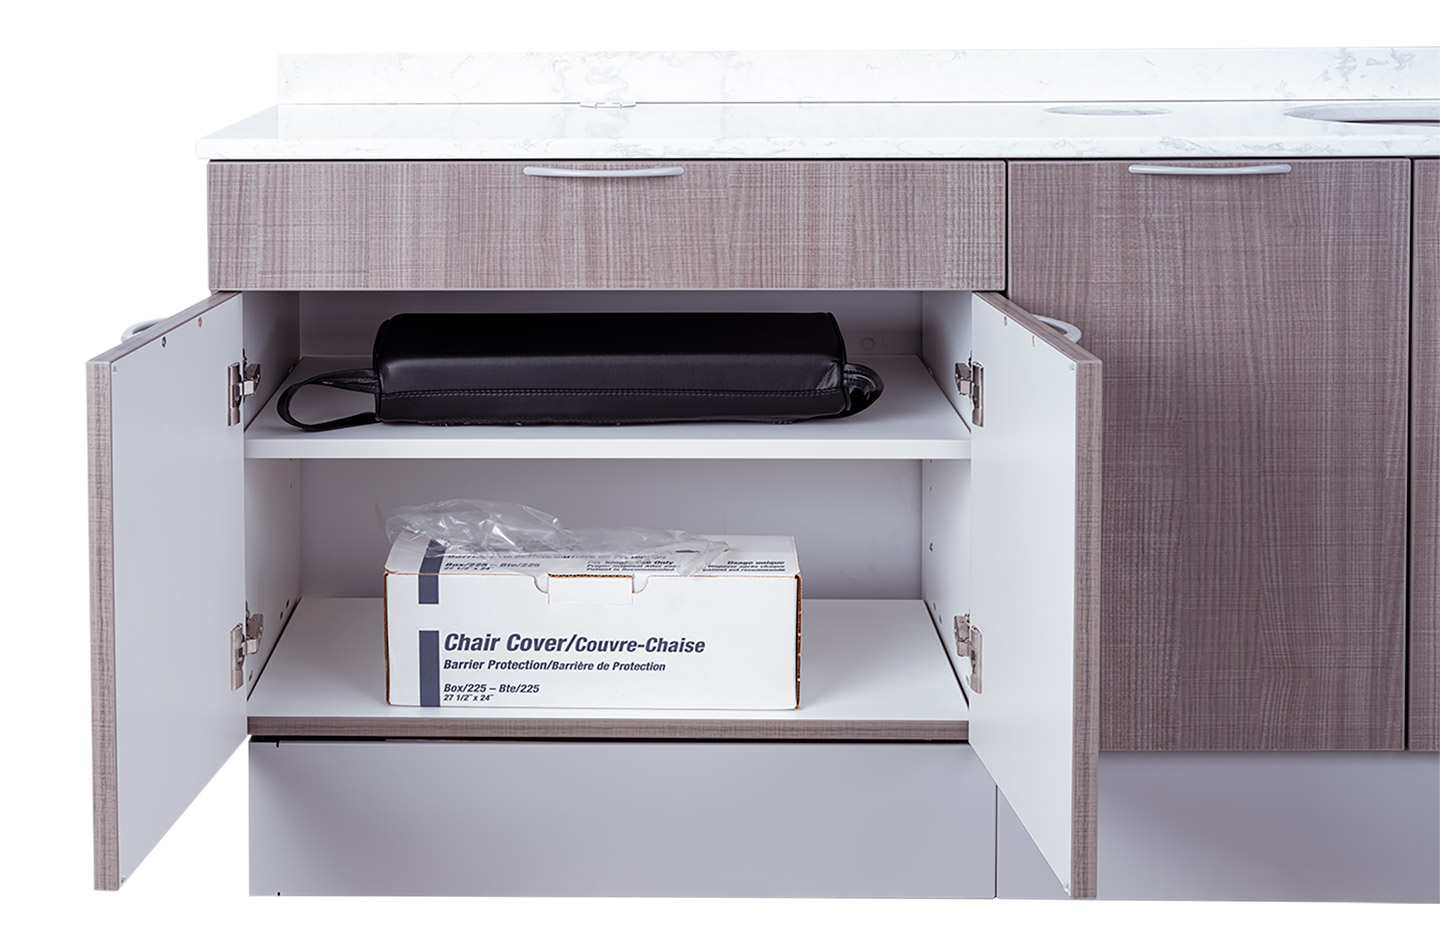 A-dec Inspire 393 storage console with open cabinet